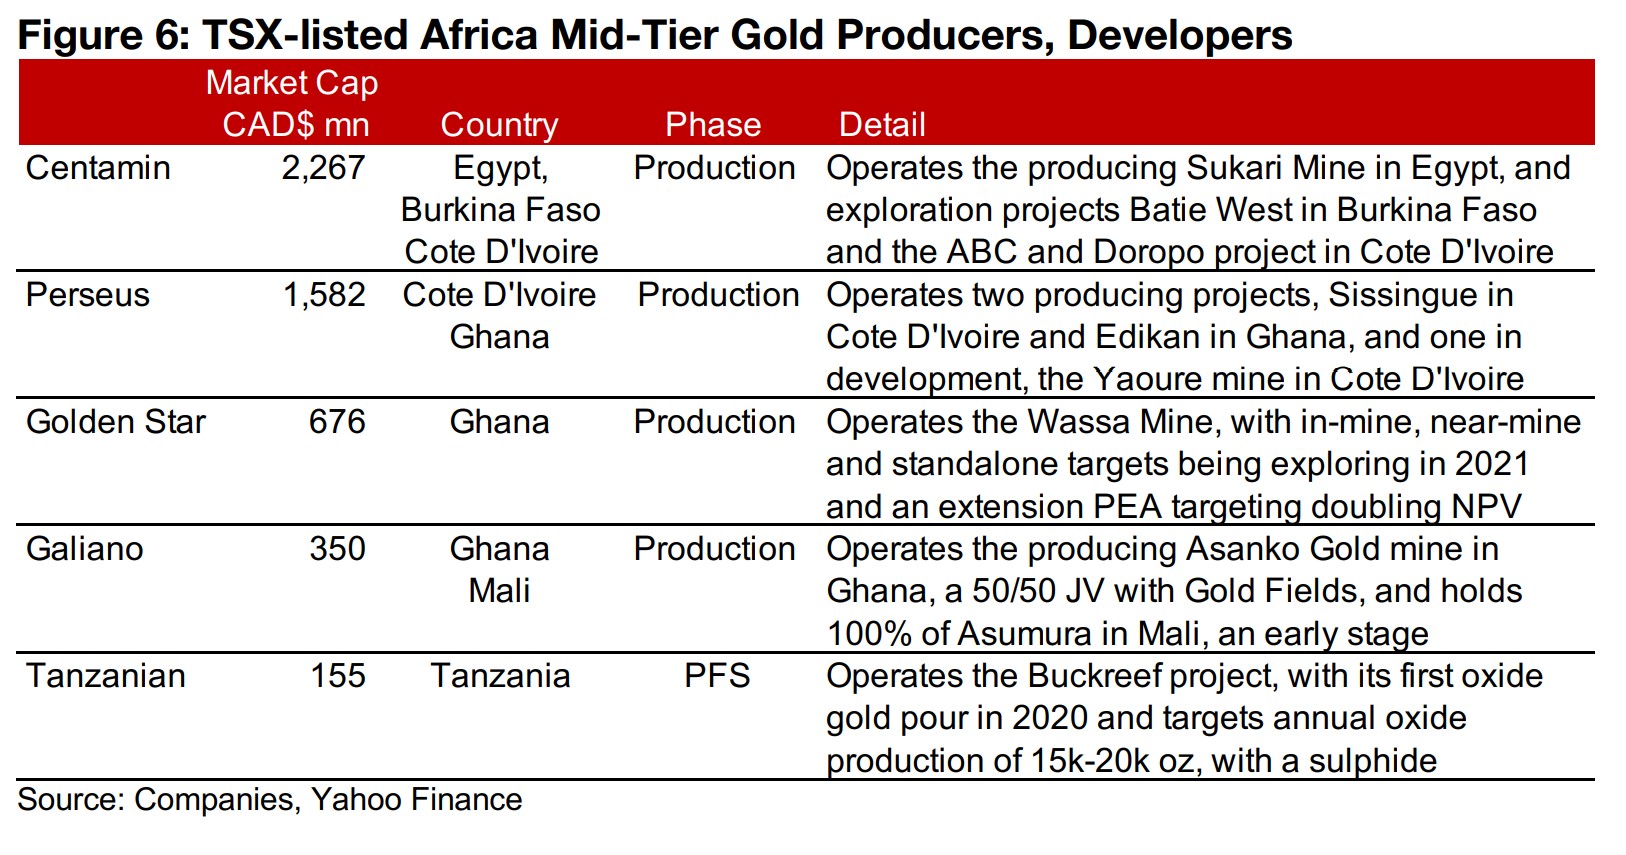 2) TSX-listed Africa Gold Producers, Developers